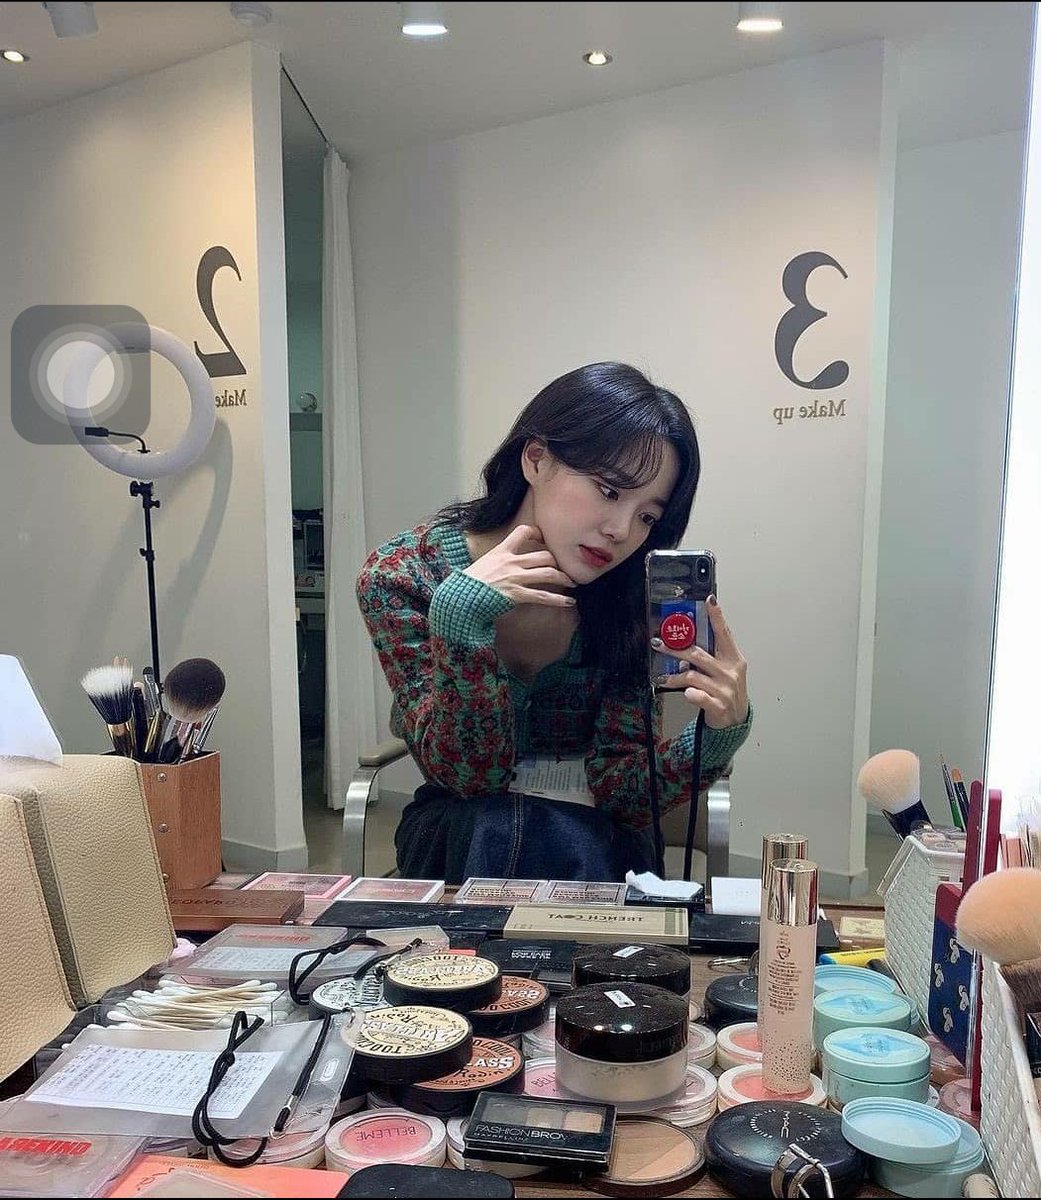 Sejeong instagram update 06 march 2021 🌼

@0828_kimsejeong 

#kimsejeong #sejeong #sesecouple #sesestyle #sejeongfashion #sejeongstyle #seseshipper #Zara #etudehouse #Maybelline #makeupforever #MISSHA #MACmakeup 

~if you have related information please DM. Thx u 🥰 🌼🐥